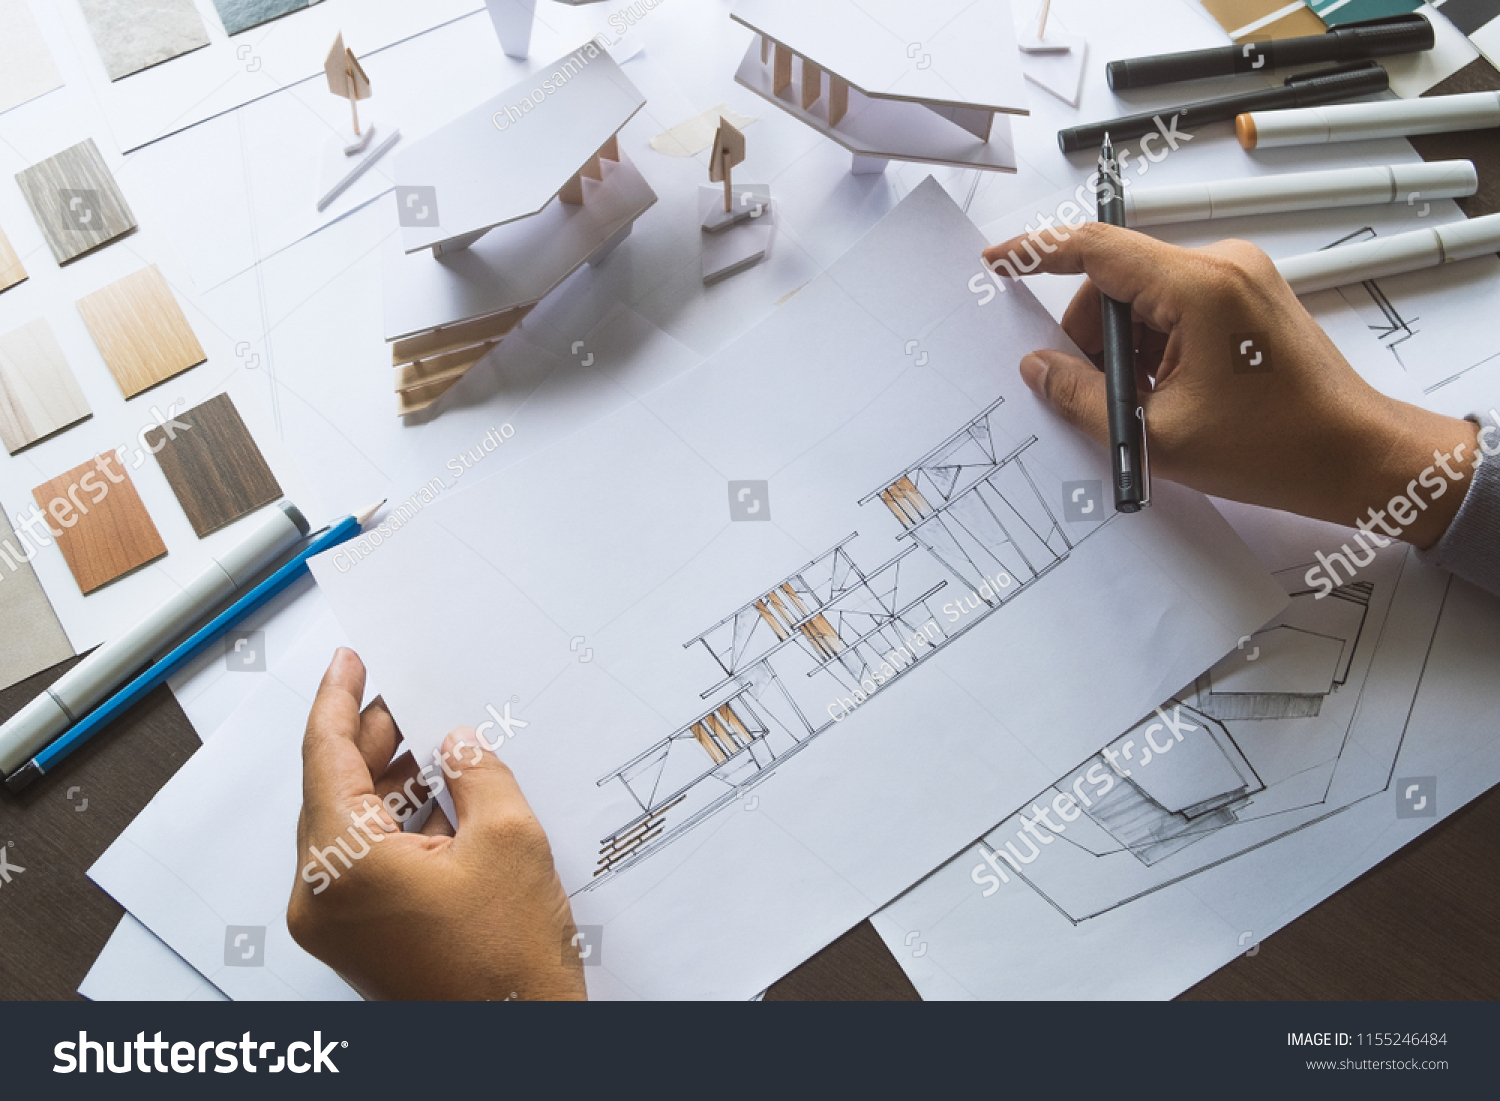 architect design working drawing sketch plans blueprints and making architectural construction model in architect studio #1155246484